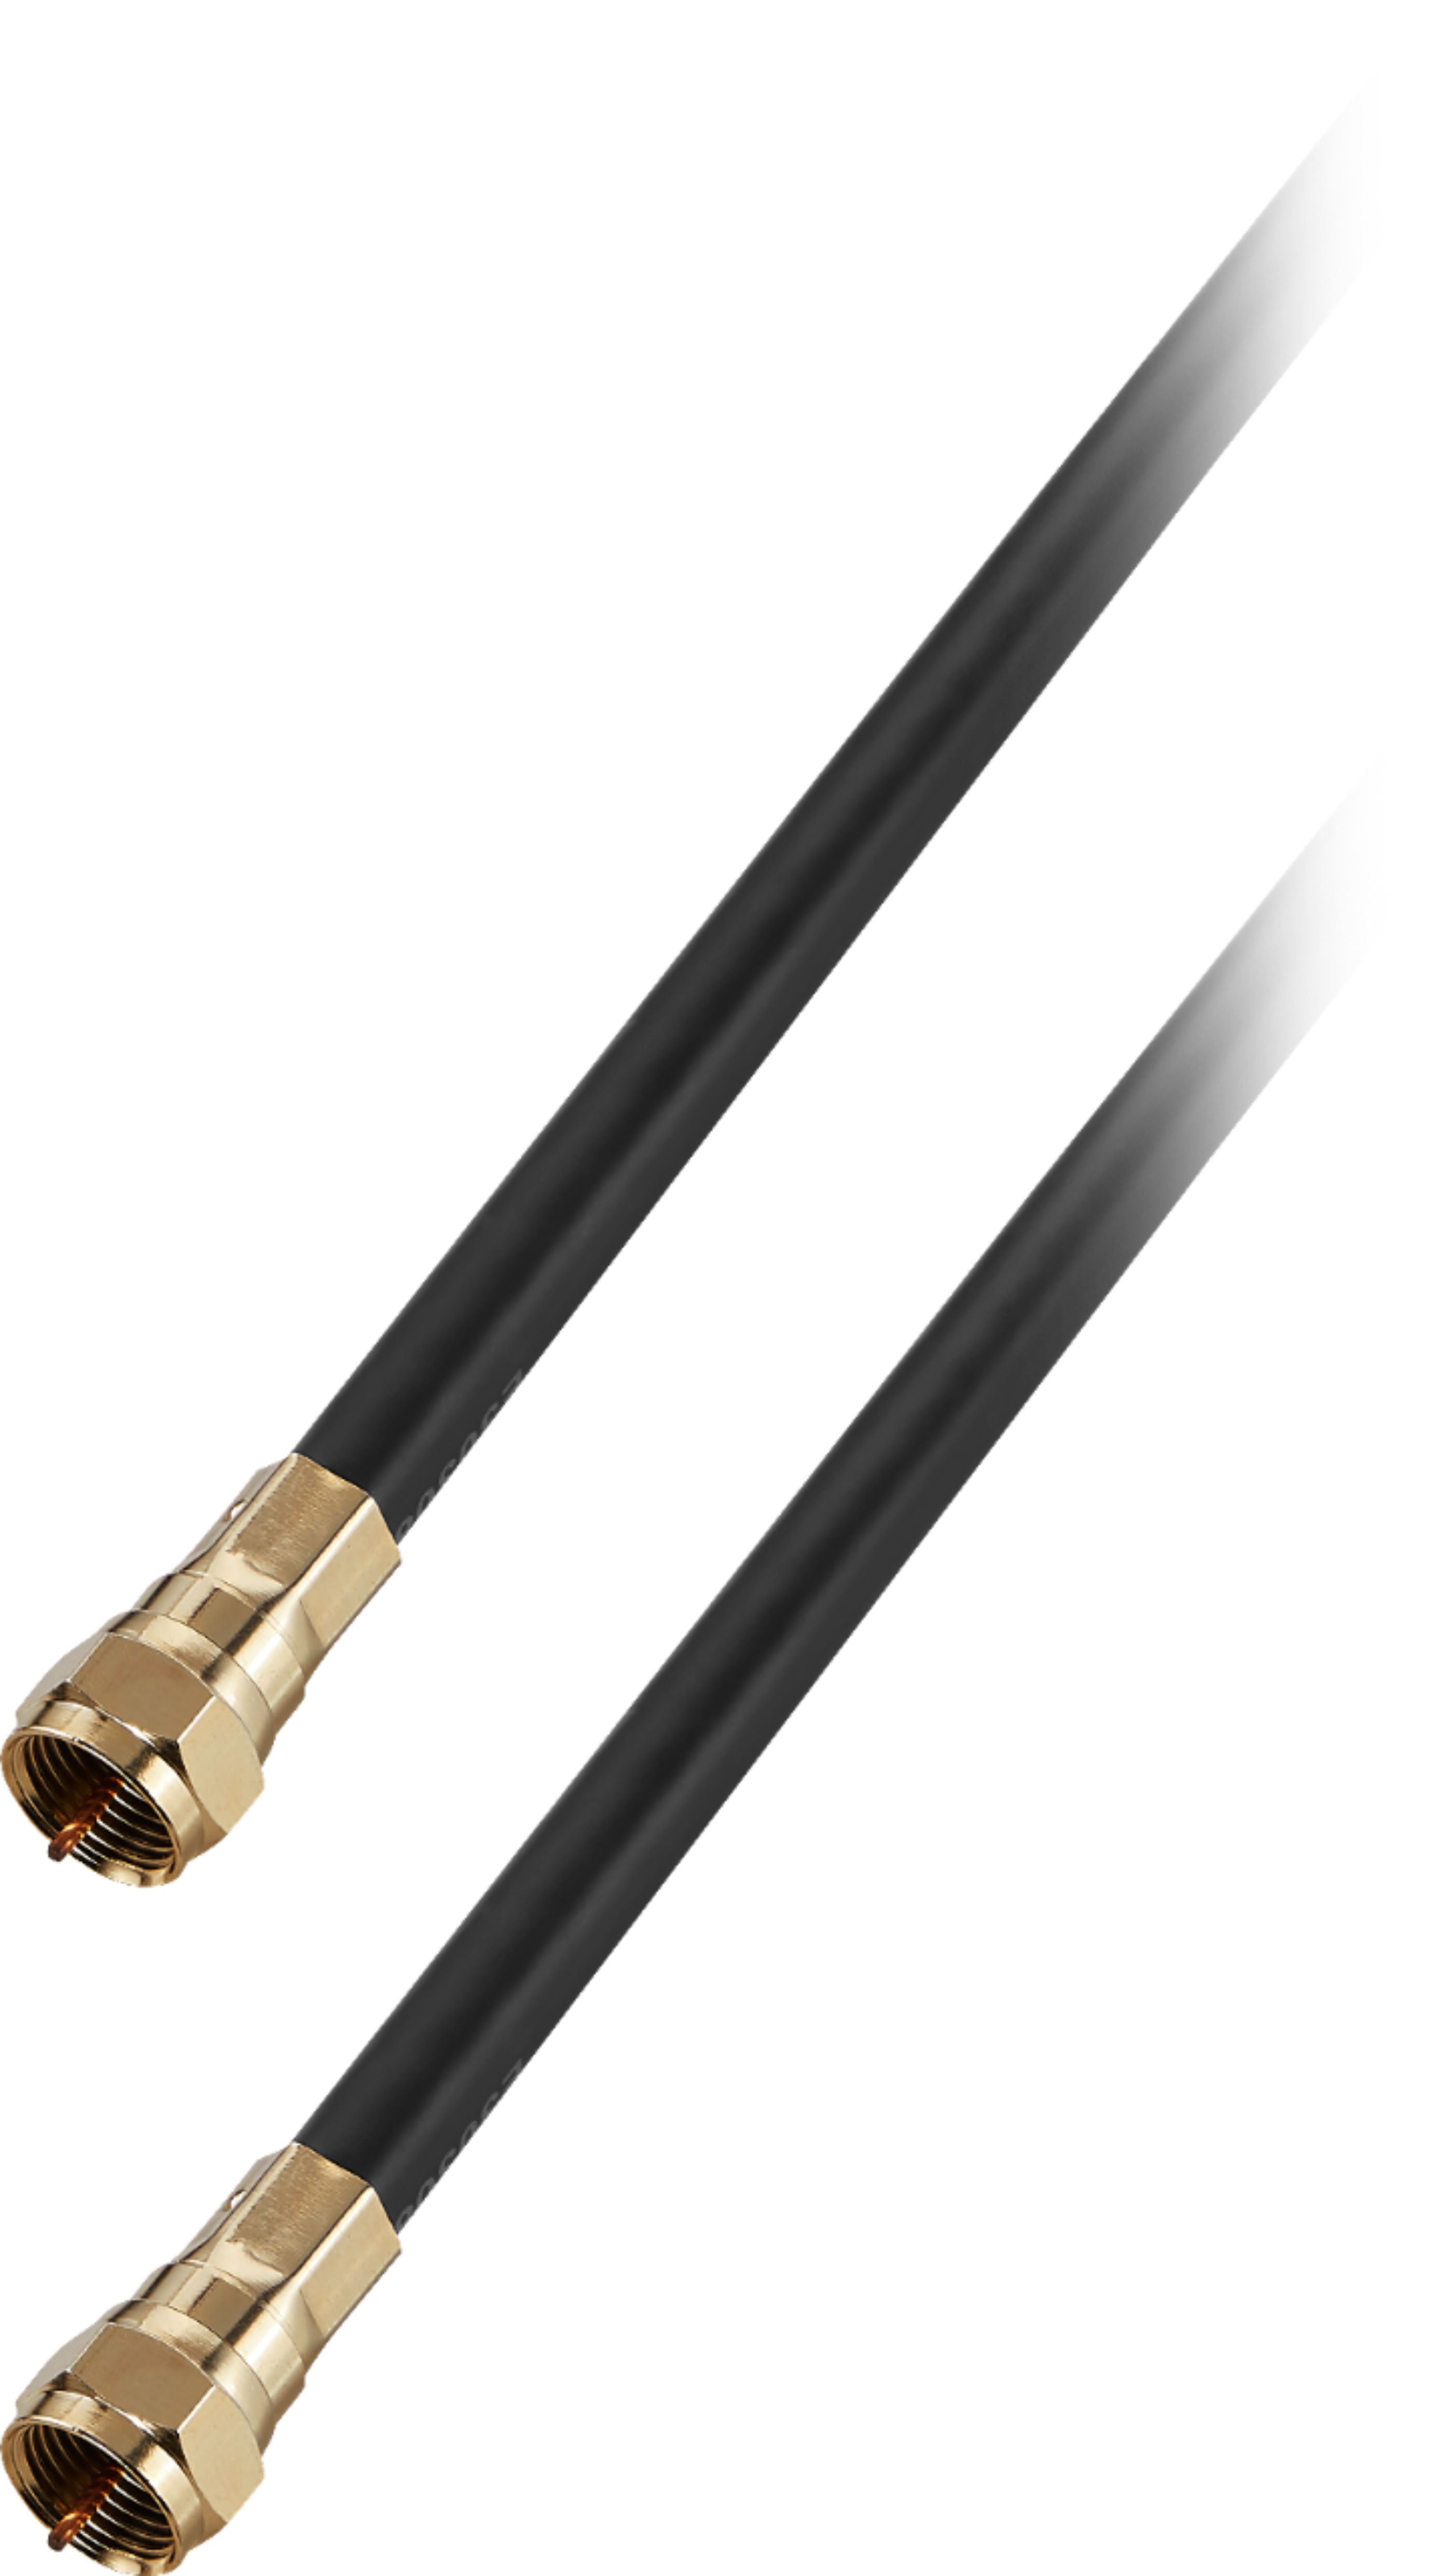 Angle View: Best Buy essentials™ - 6' Coaxial A/V Cable - Black